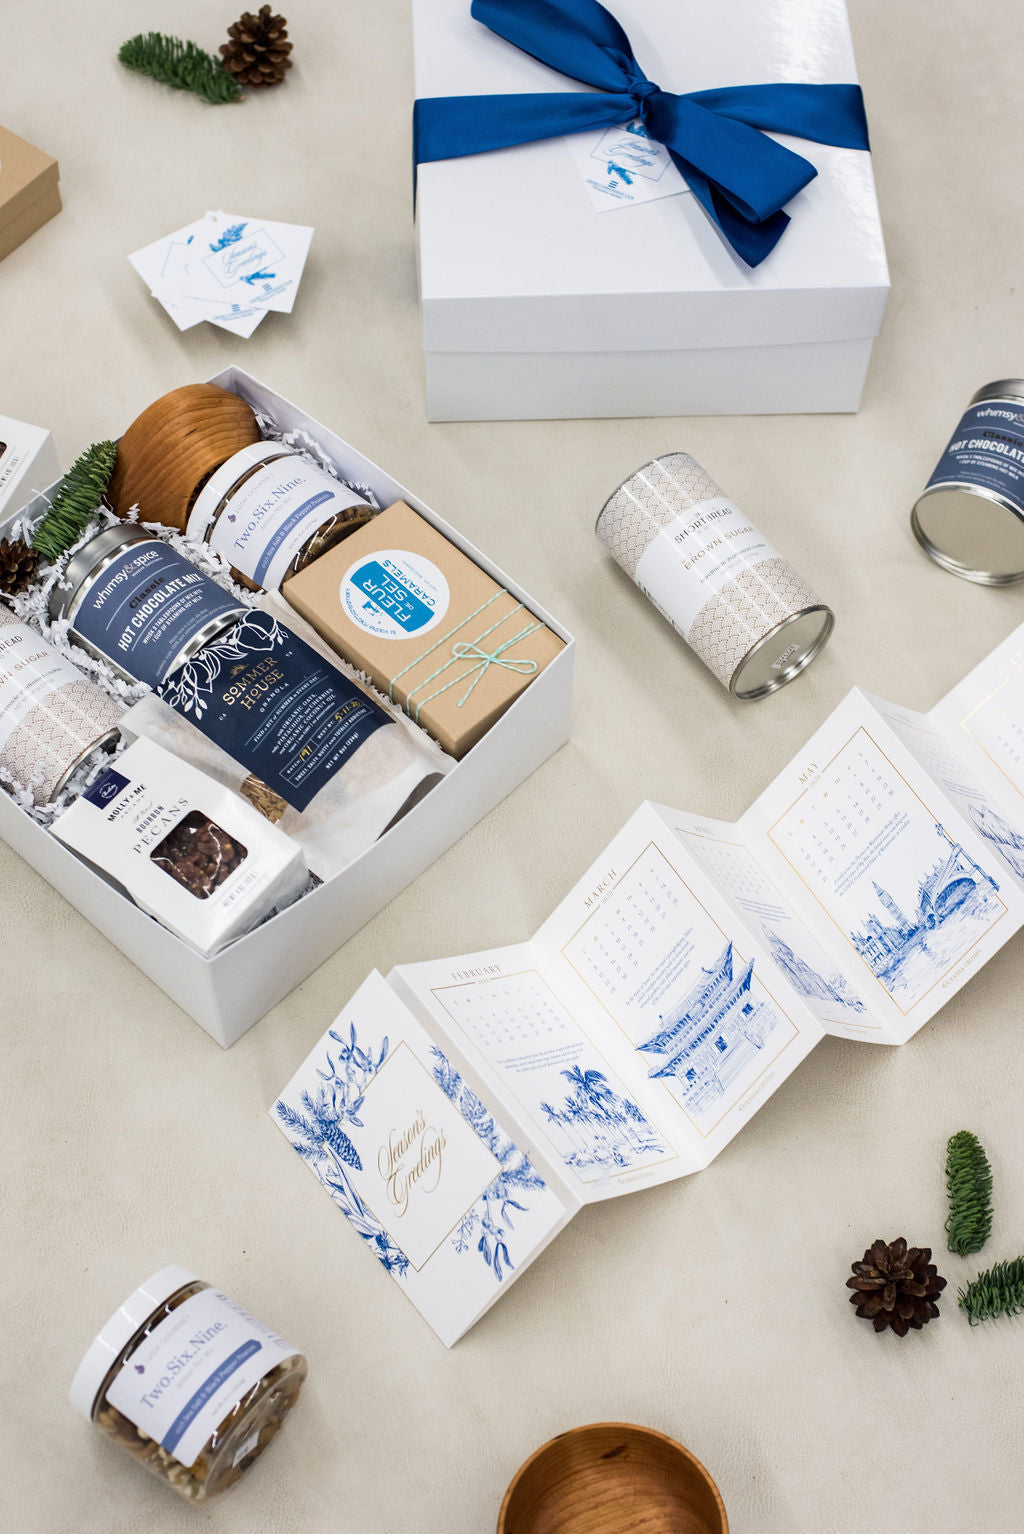 Gallery: Blue and White Holiday Gifts for Oceania